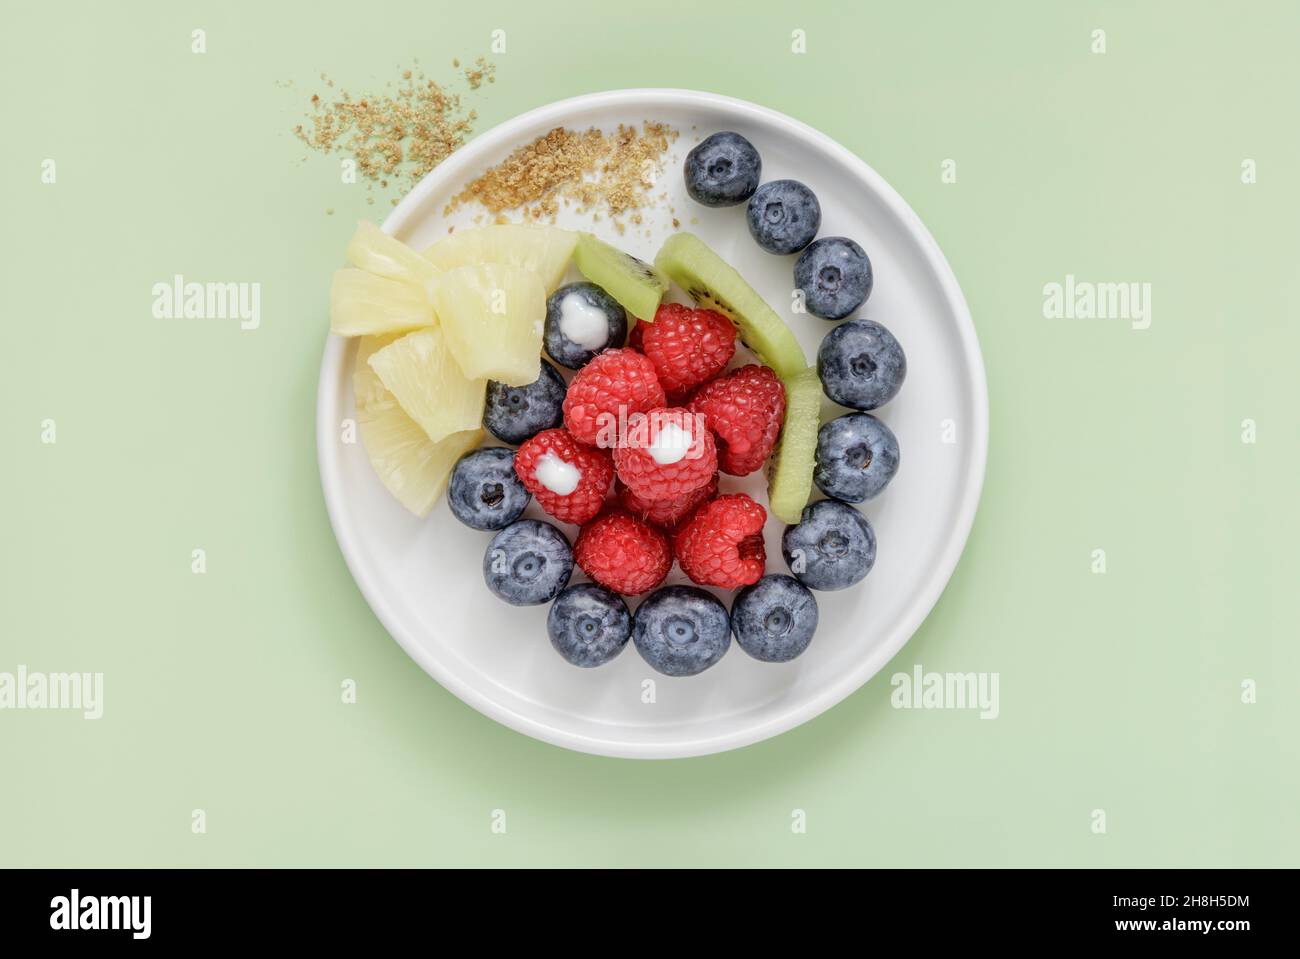 Fresh berries and fruits on white plate with copy space Stock Photo